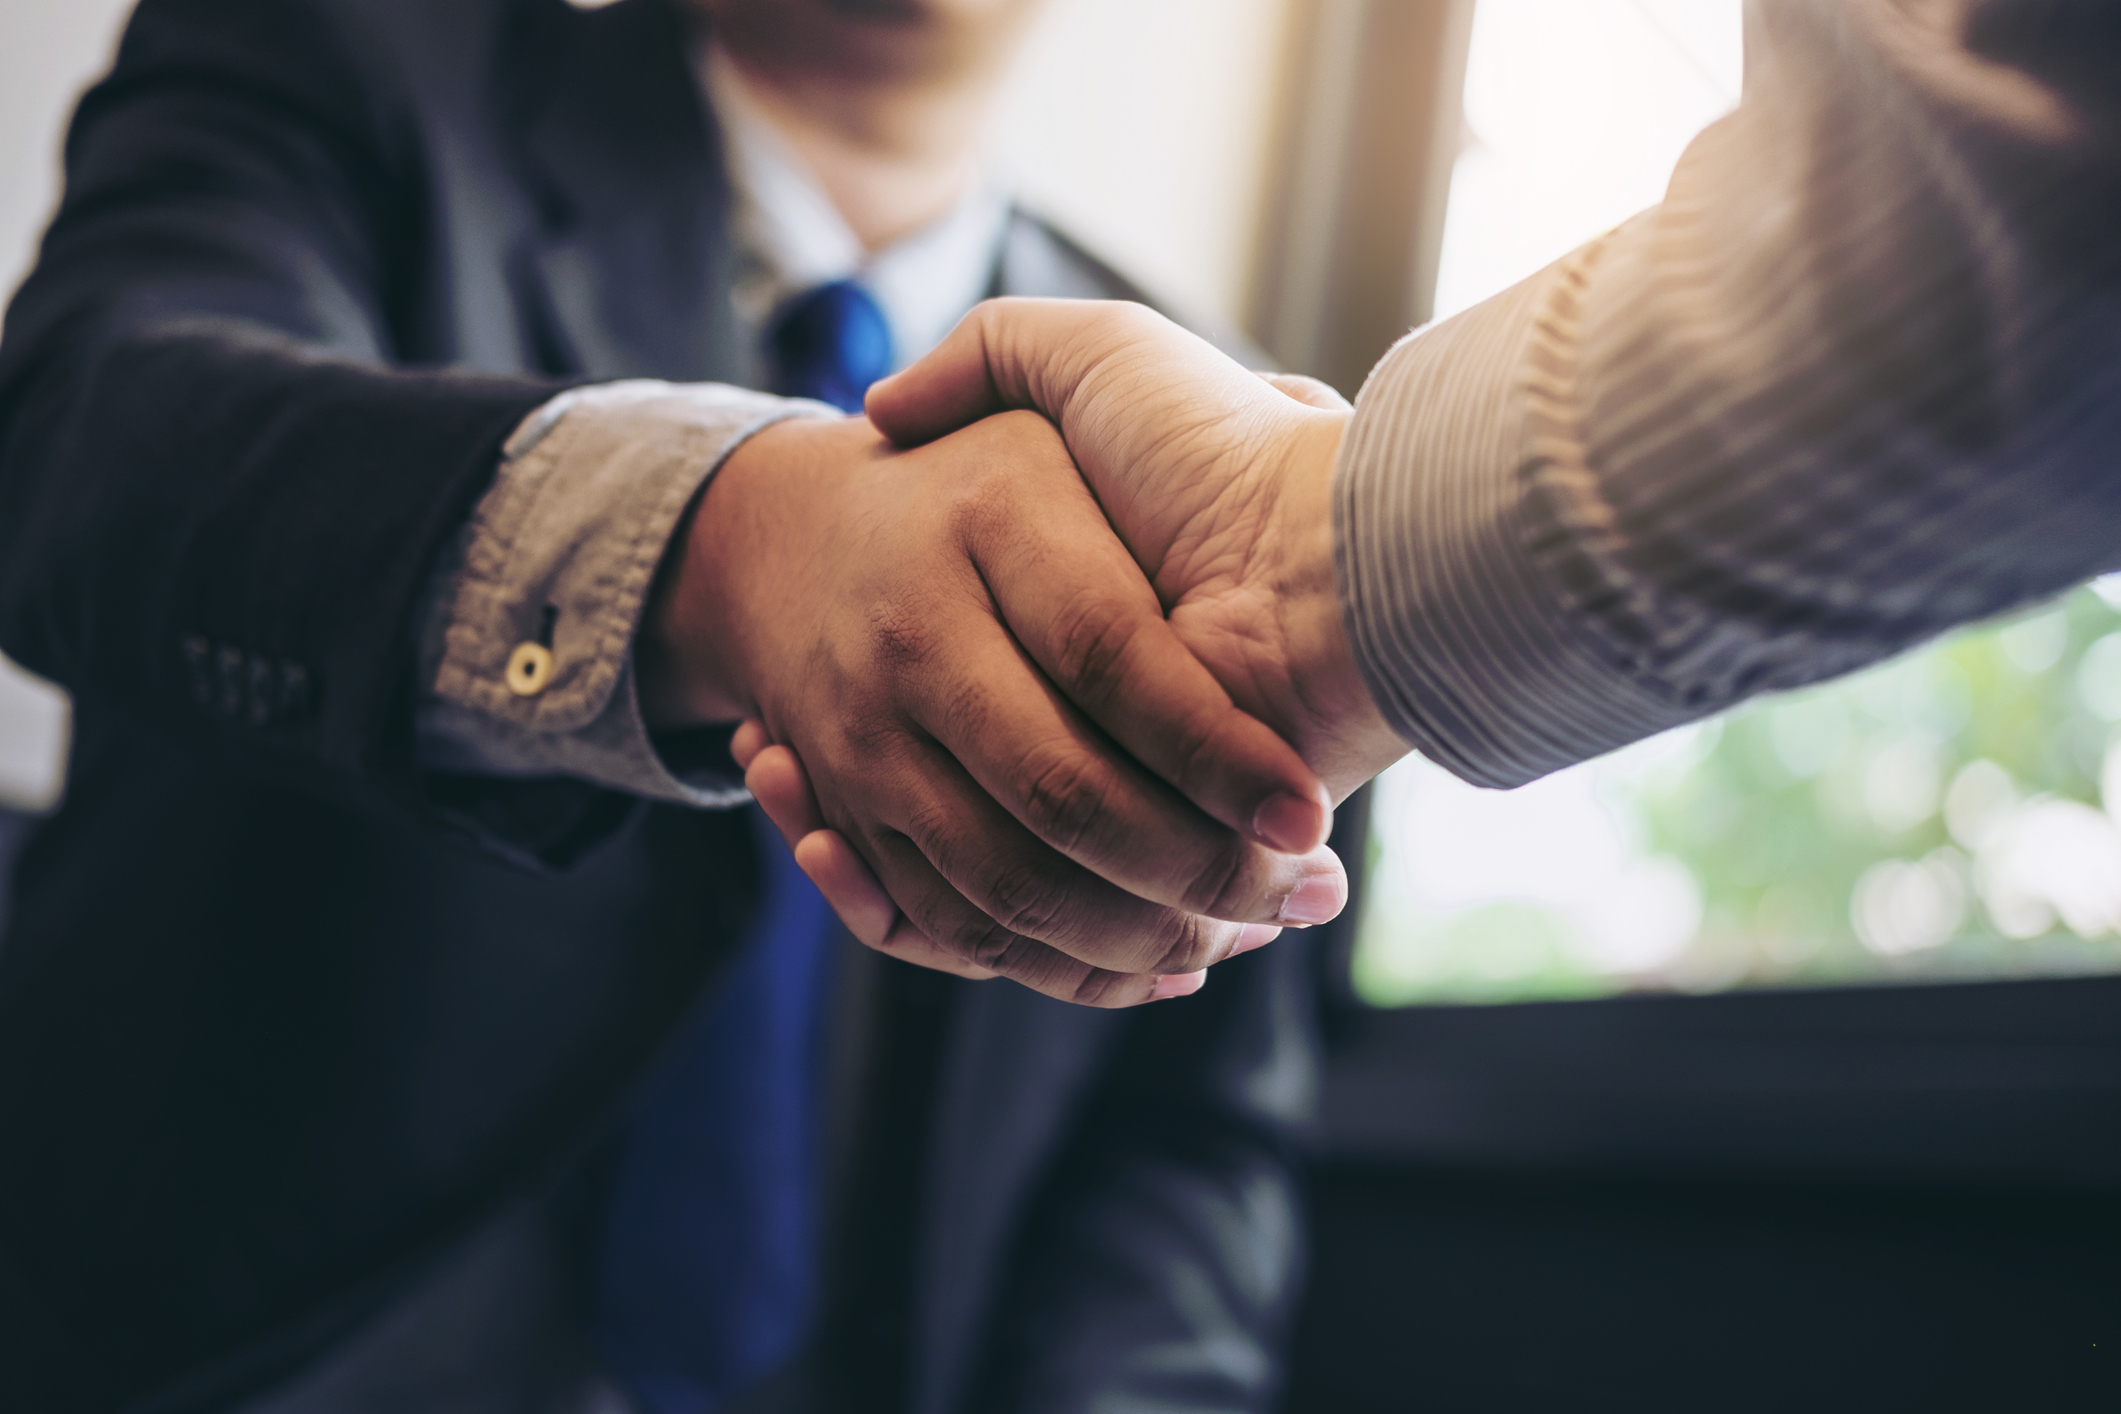 Two people in business attire shaking hands, symbolizing an agreement or partnership. The background is slightly blurred, with natural light coming through a window, giving a warm tone to the scene.